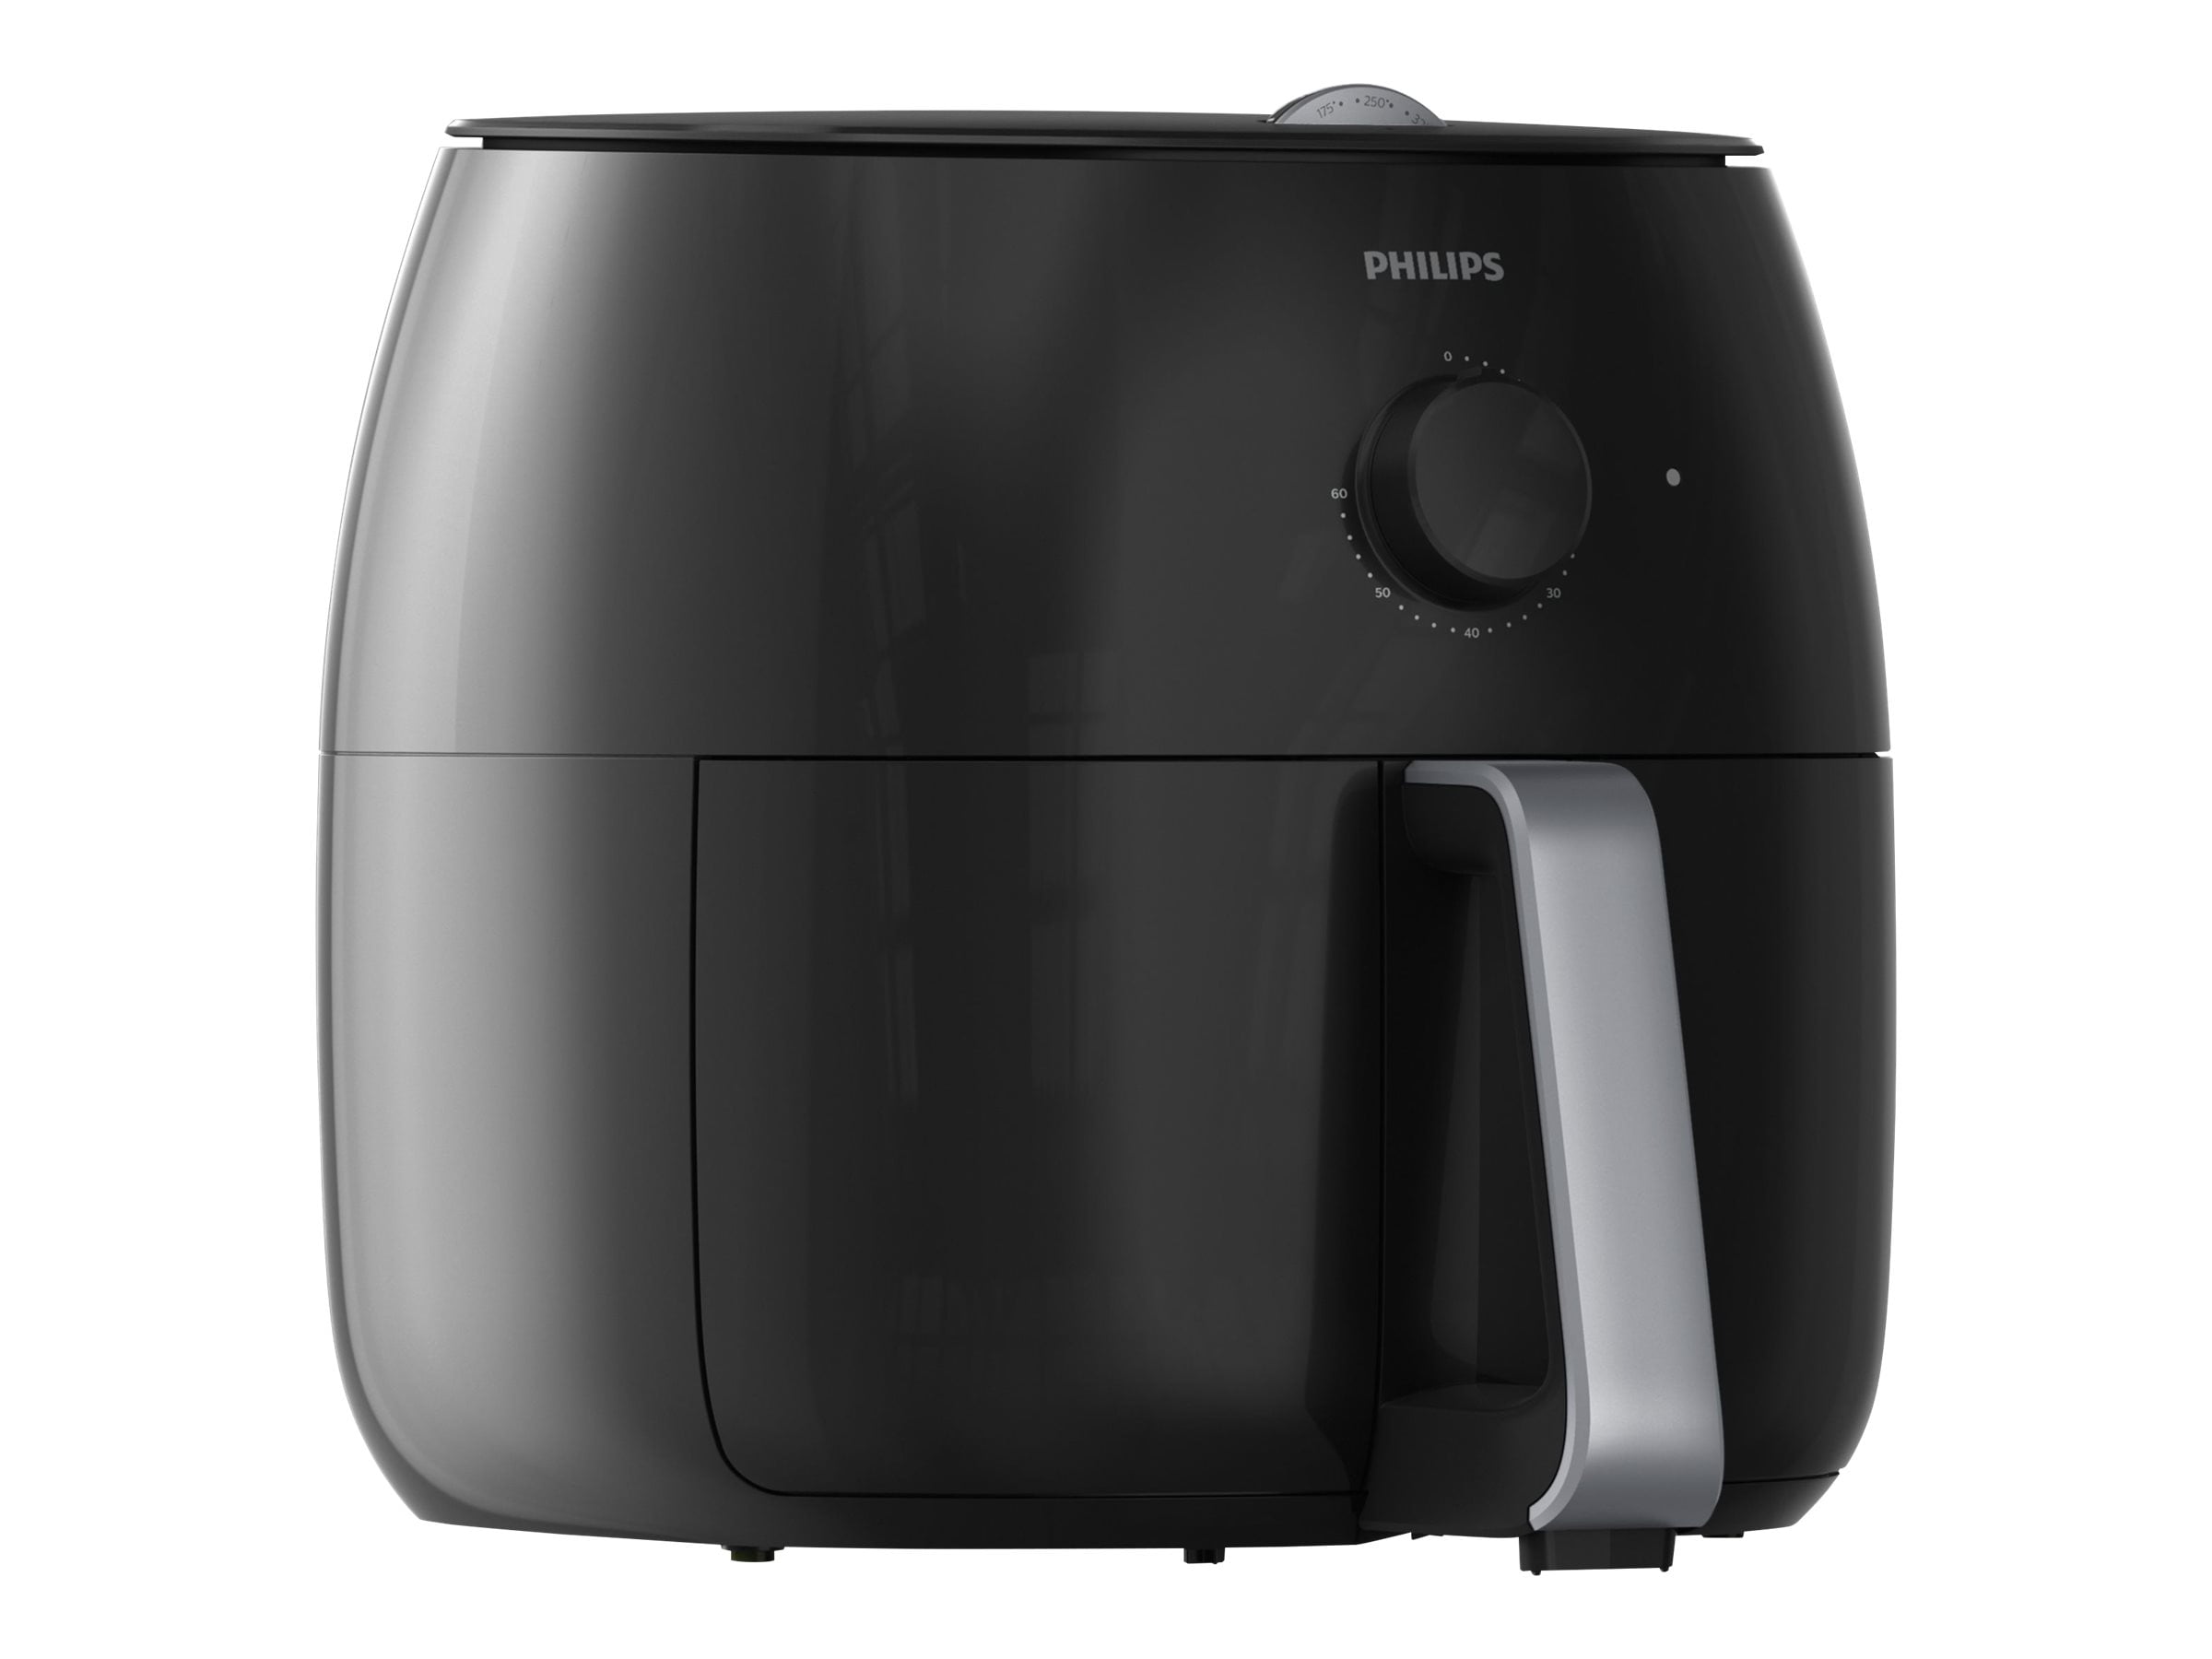 Philips TurboStar Digital Air Fryer 2019: What reviewers are